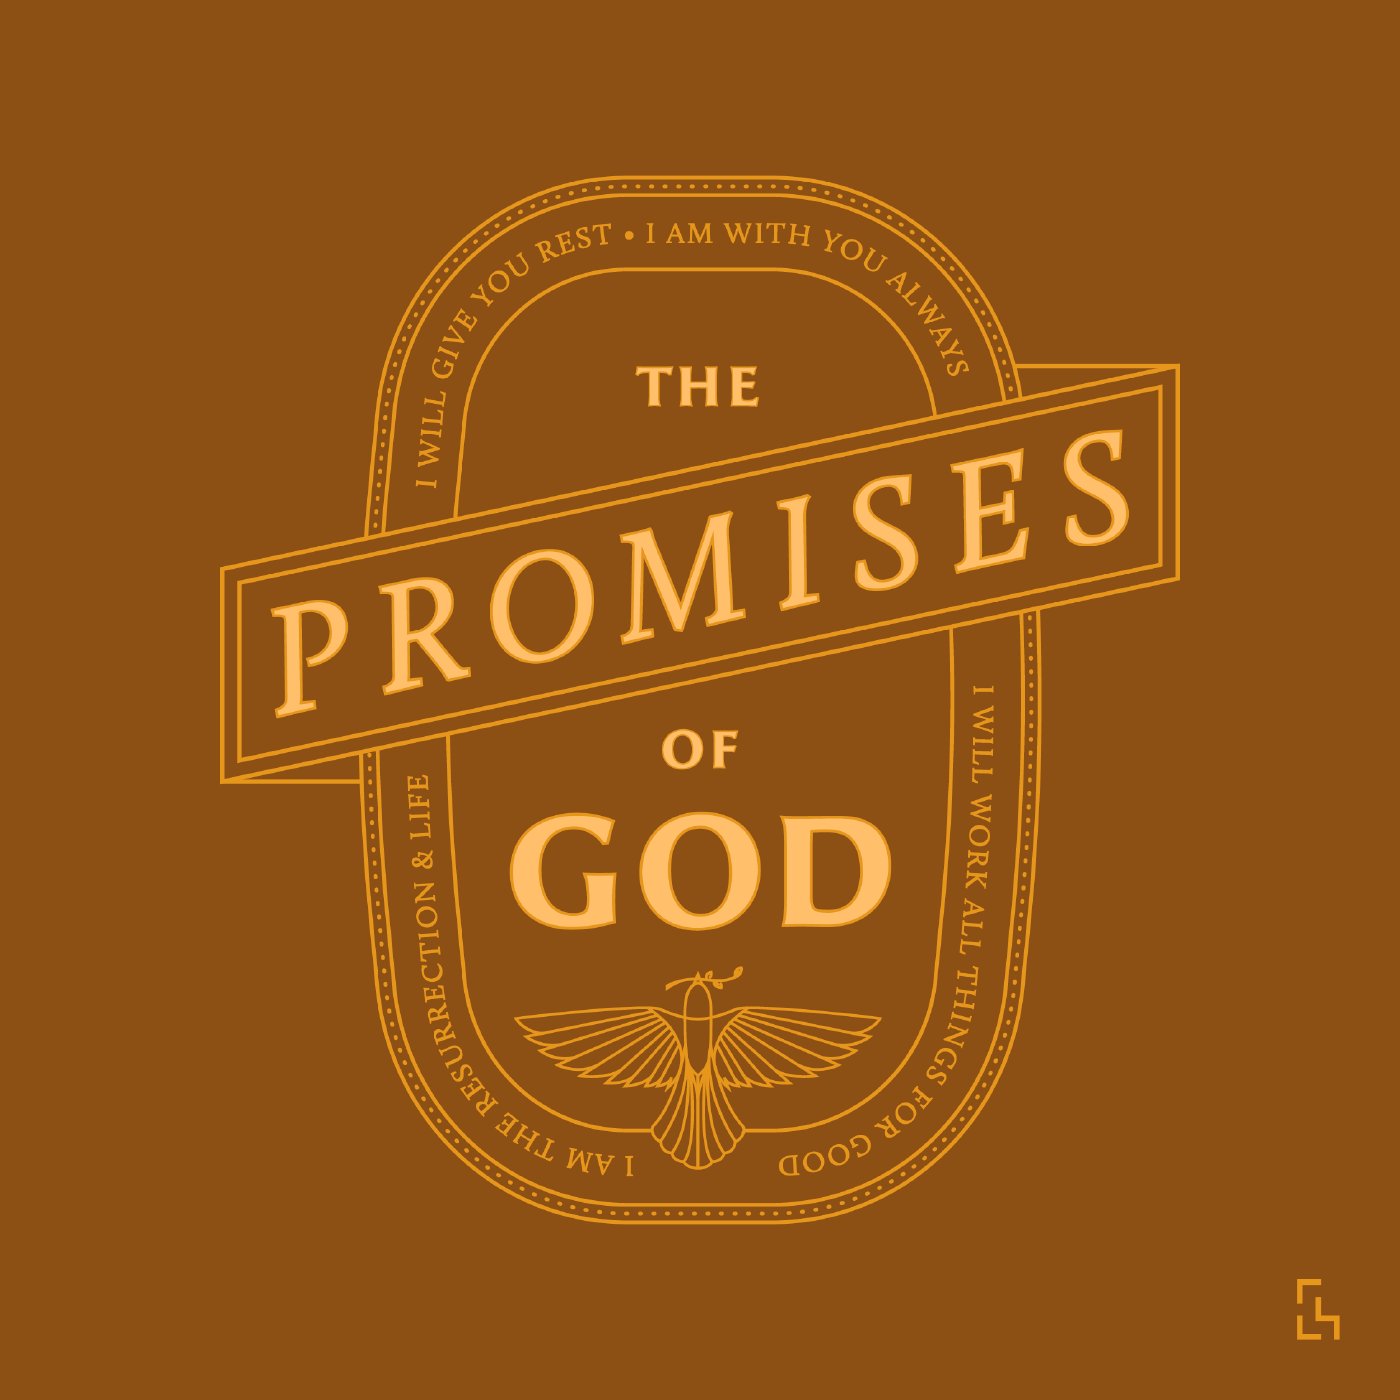 The Promises of God - I Will Give You Rest